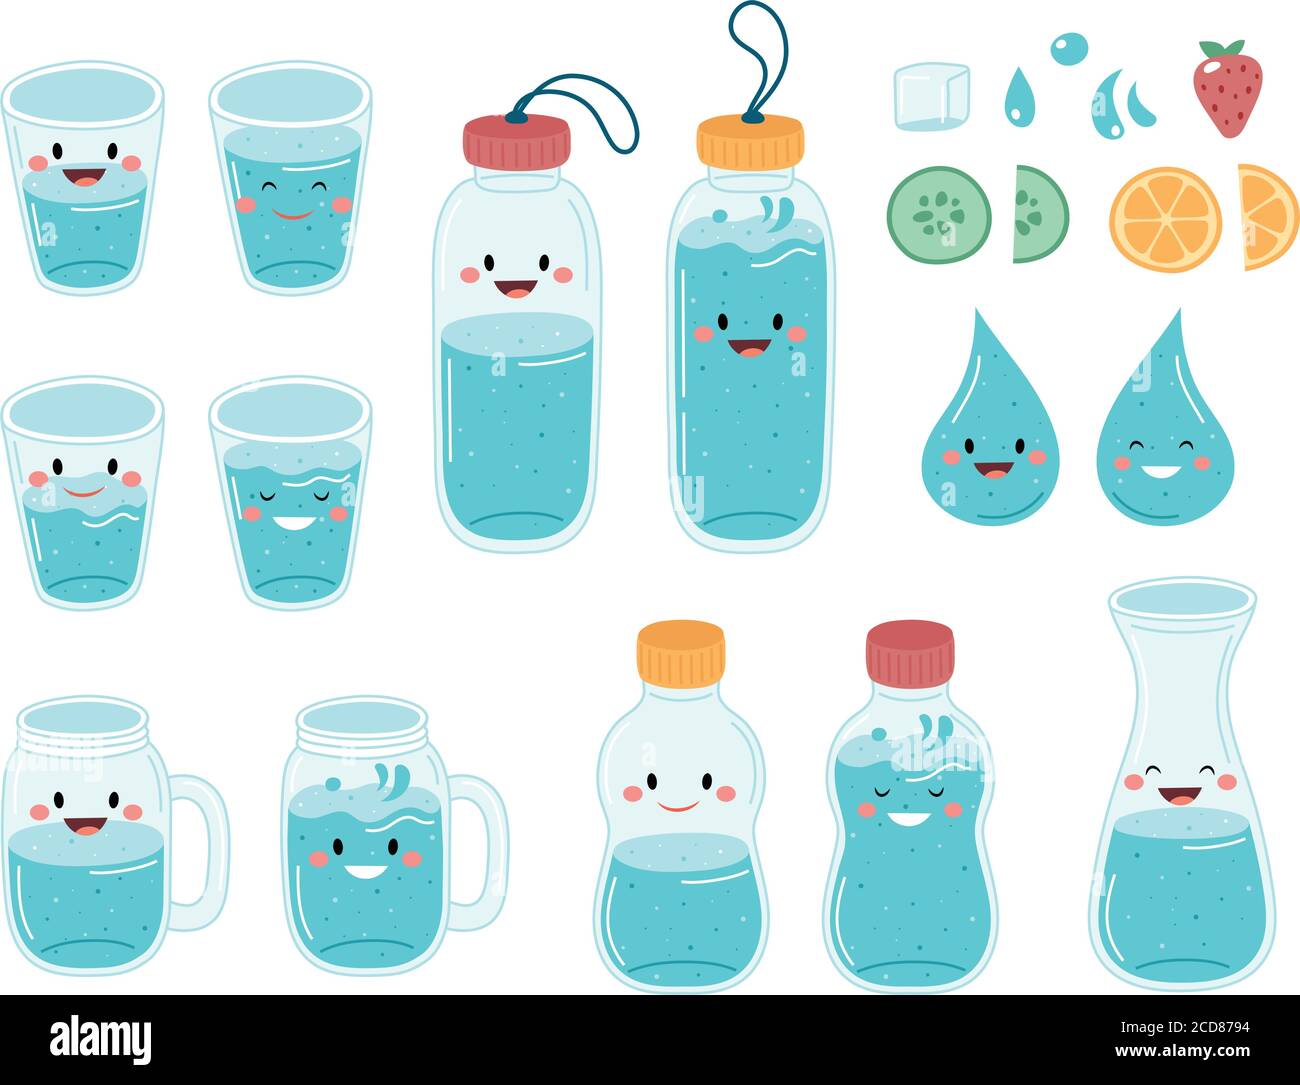 https://c8.alamy.com/comp/2CD8794/drink-more-water-cute-bottles-and-glasses-collection-2CD8794.jpg